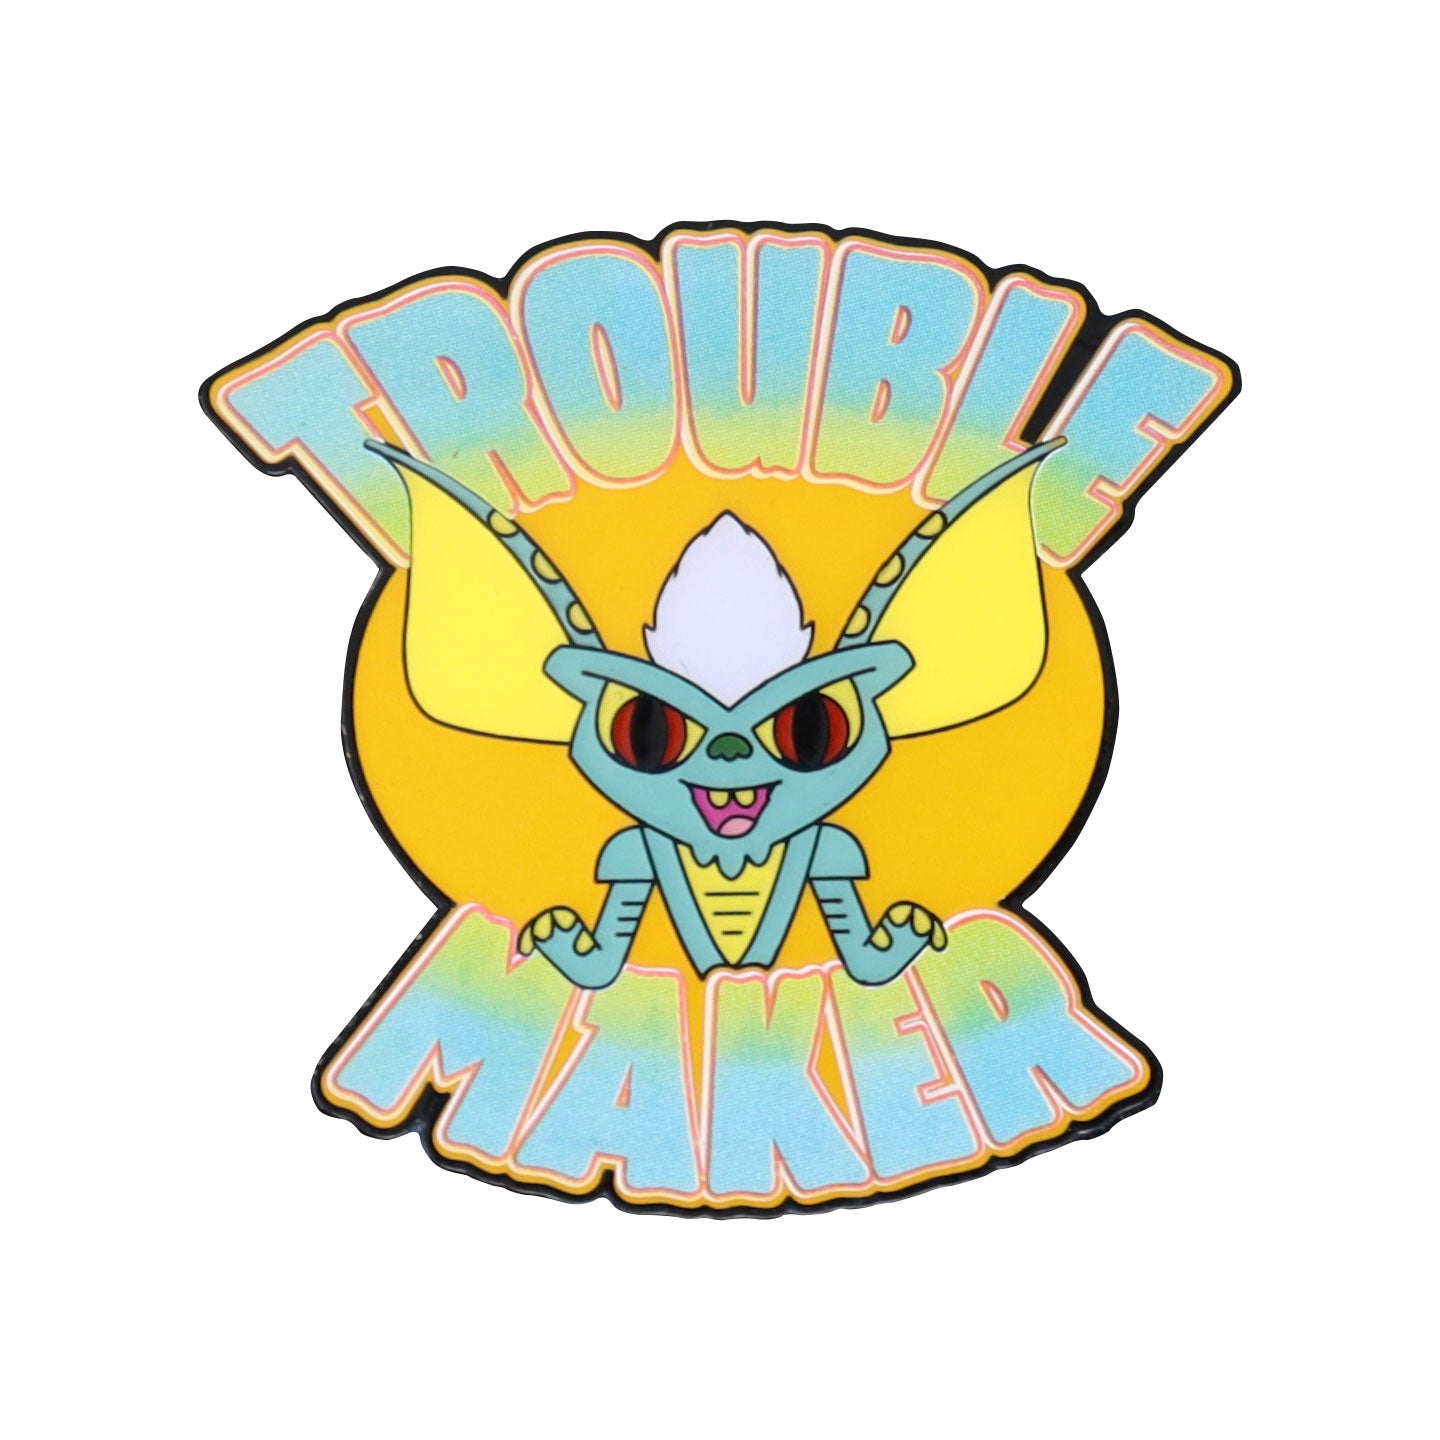 Gremlins Trouble Maker limited edition pin badge